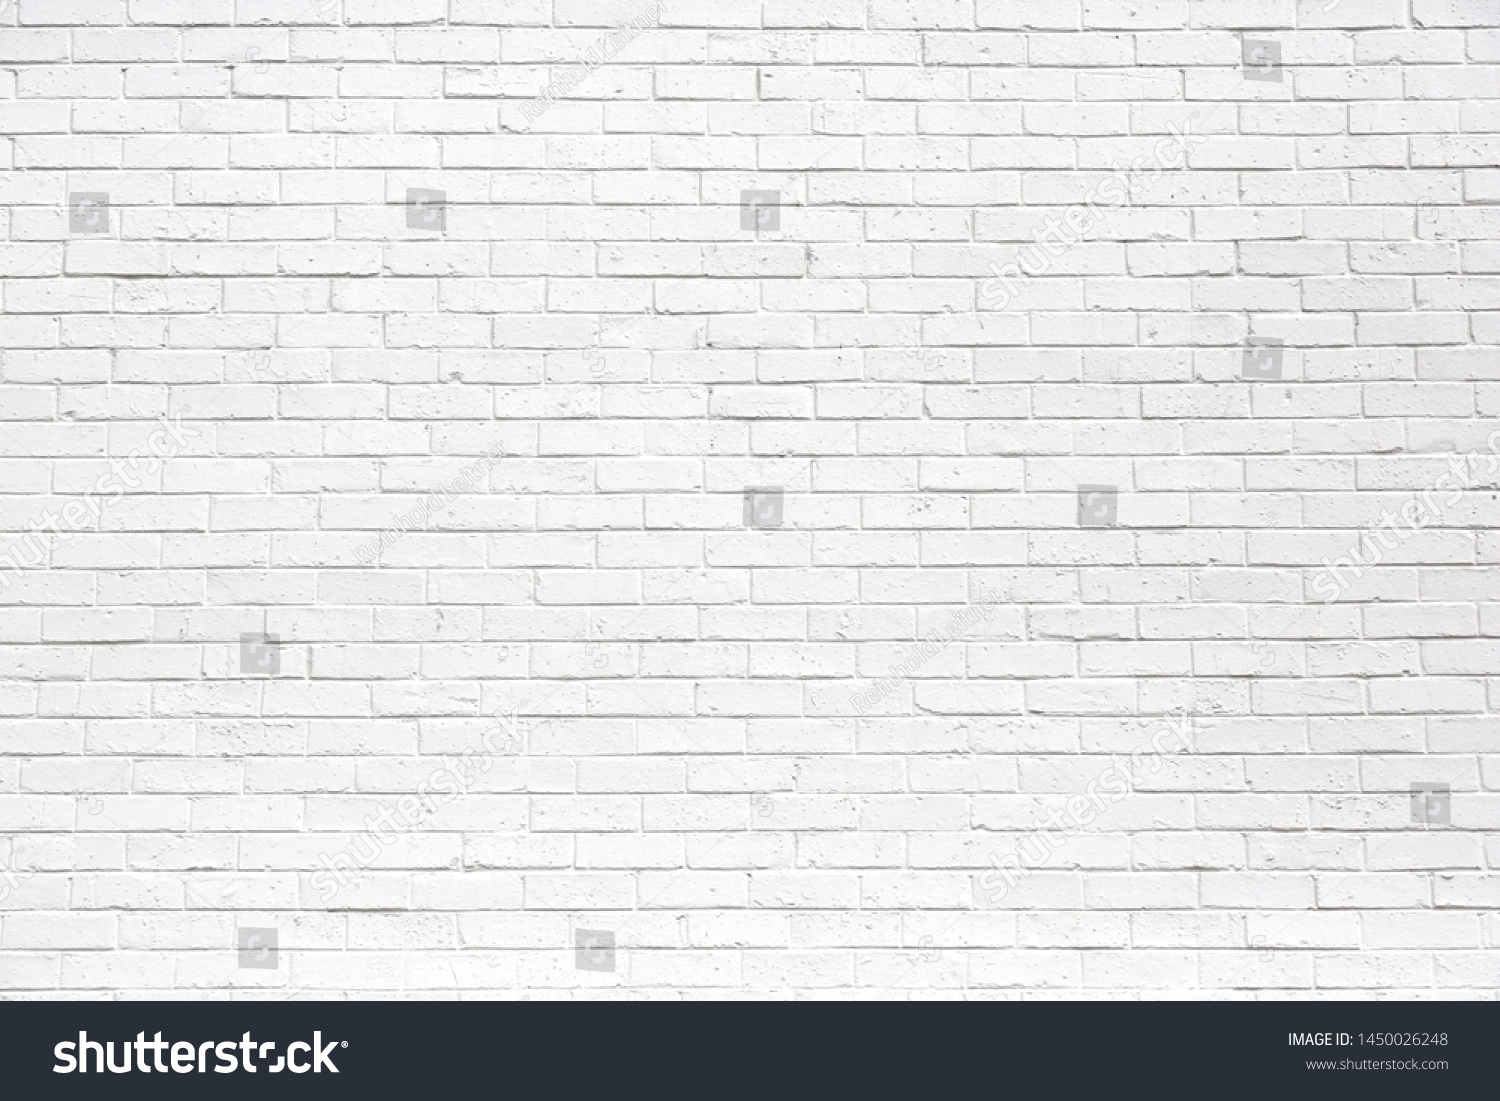 brick wall may used as background #1450026248